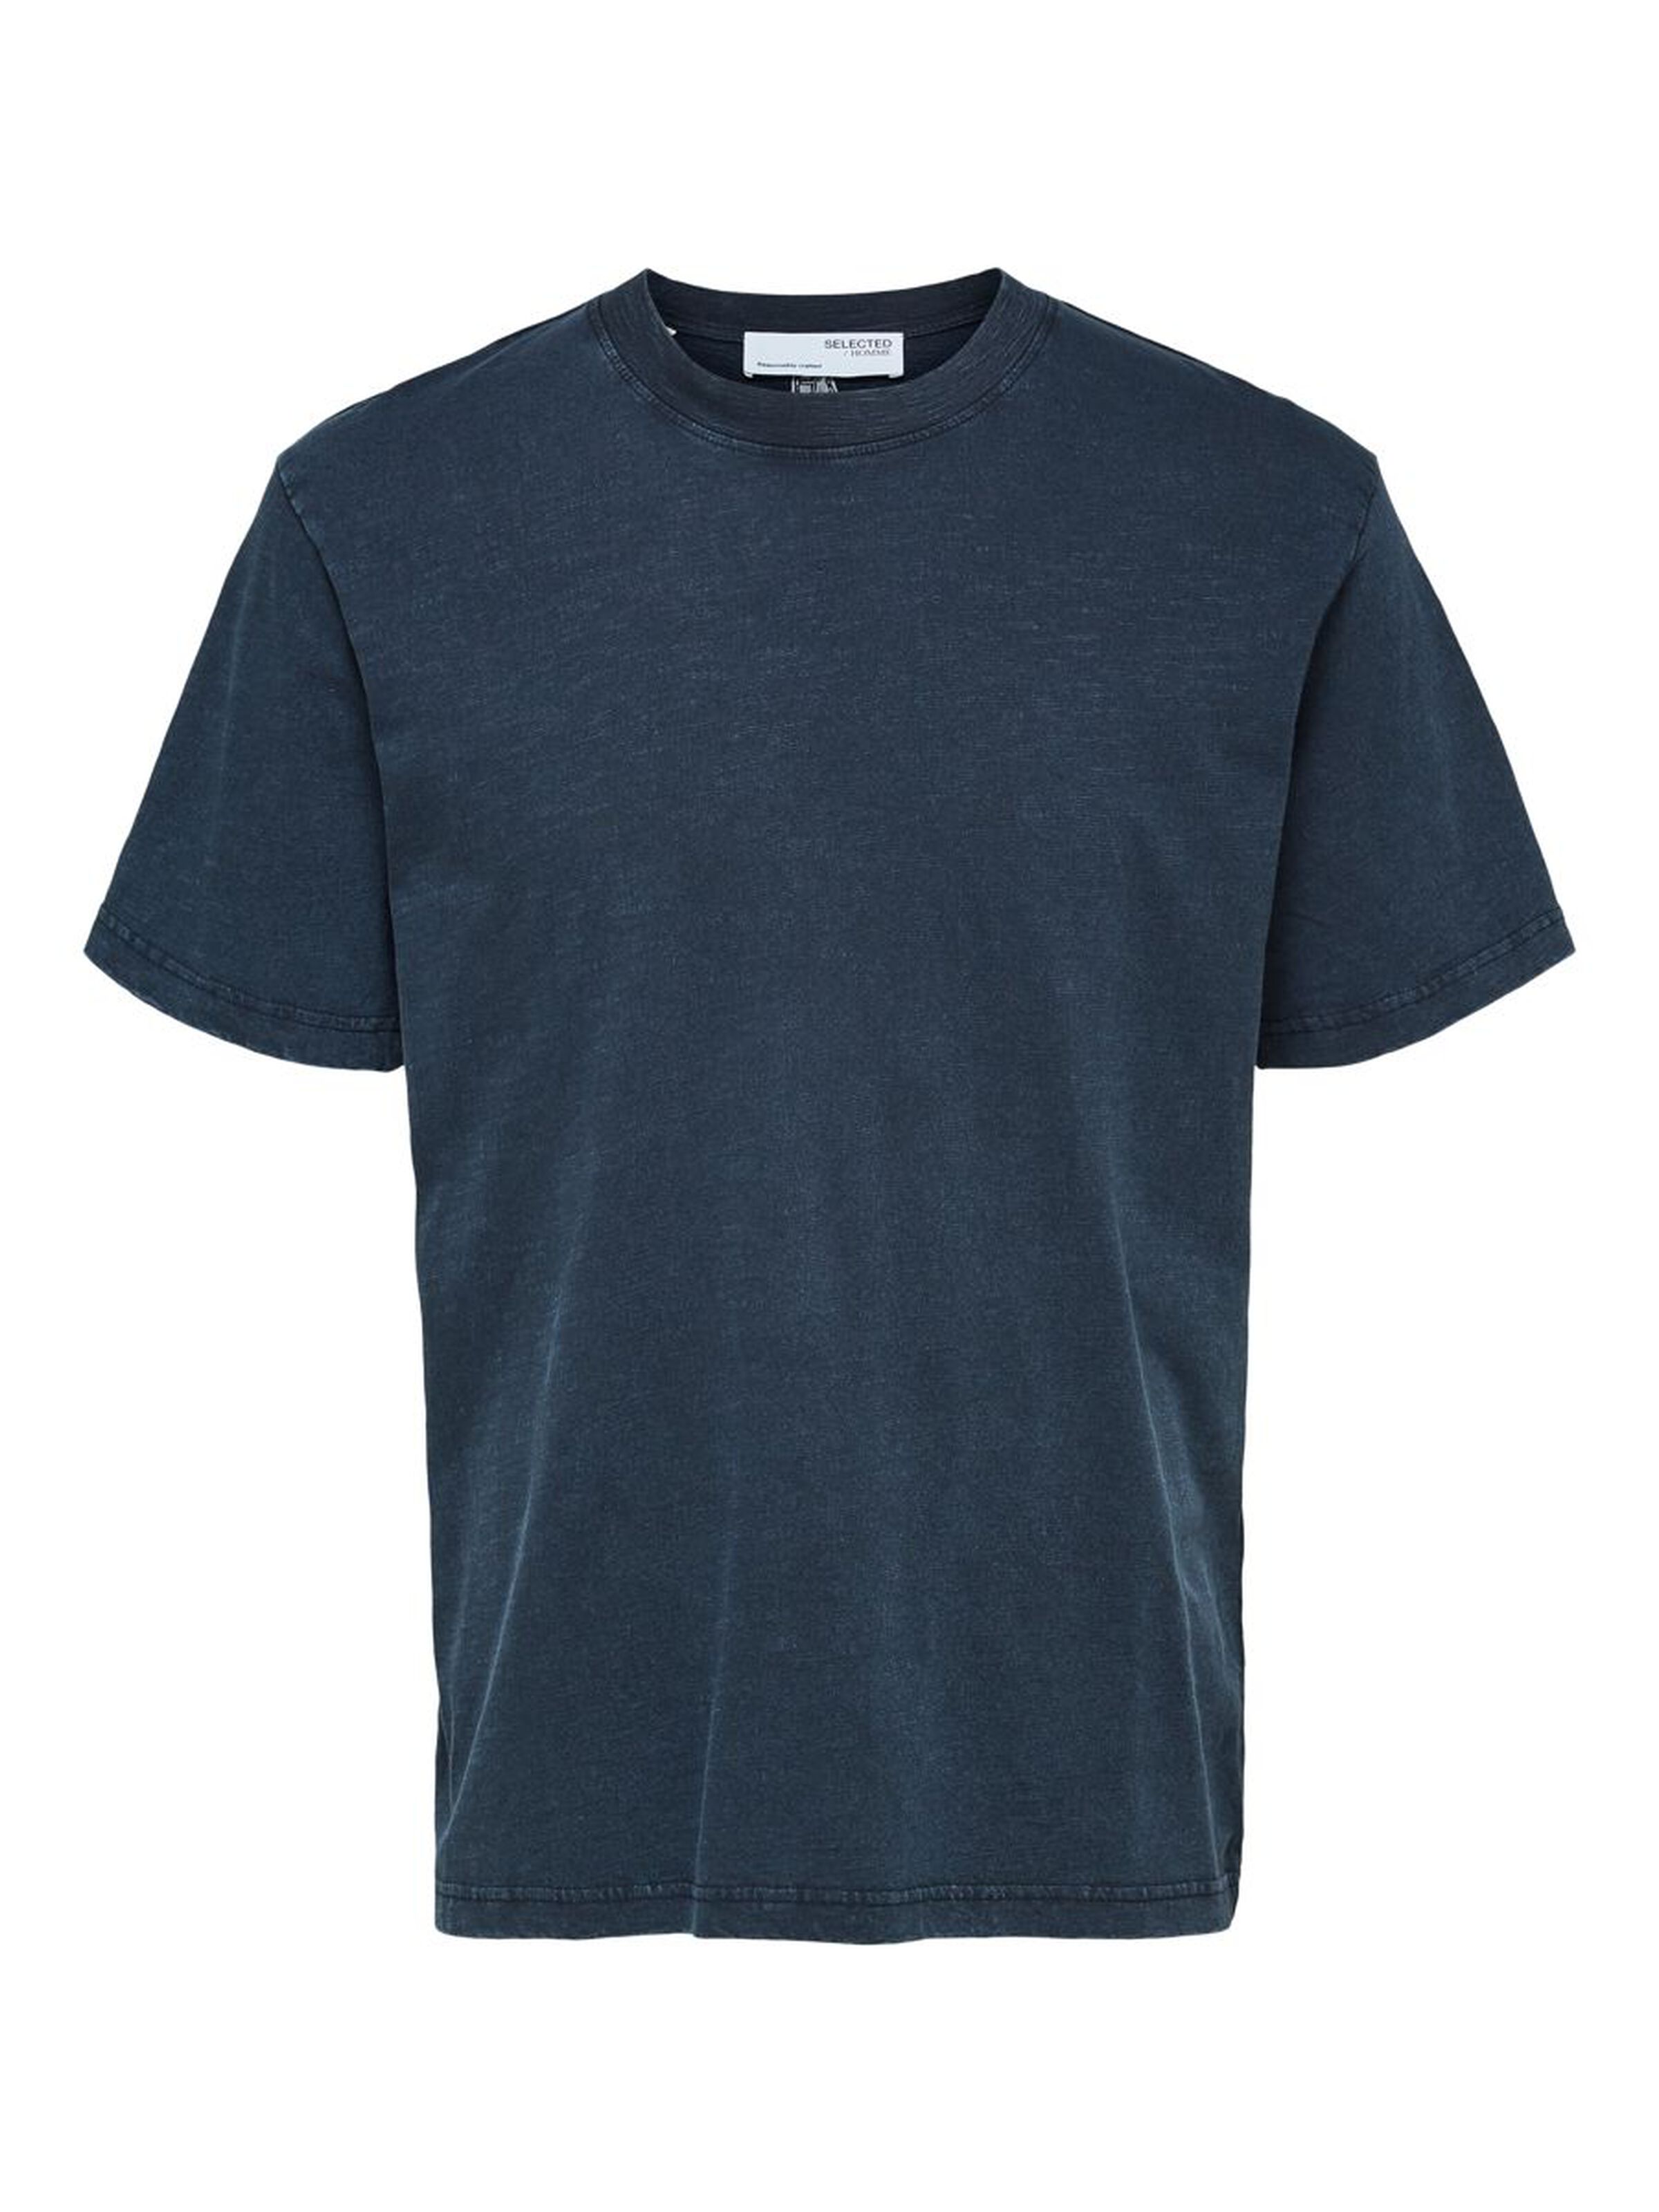 Selected Homme Herb Tee - Sky Captain 